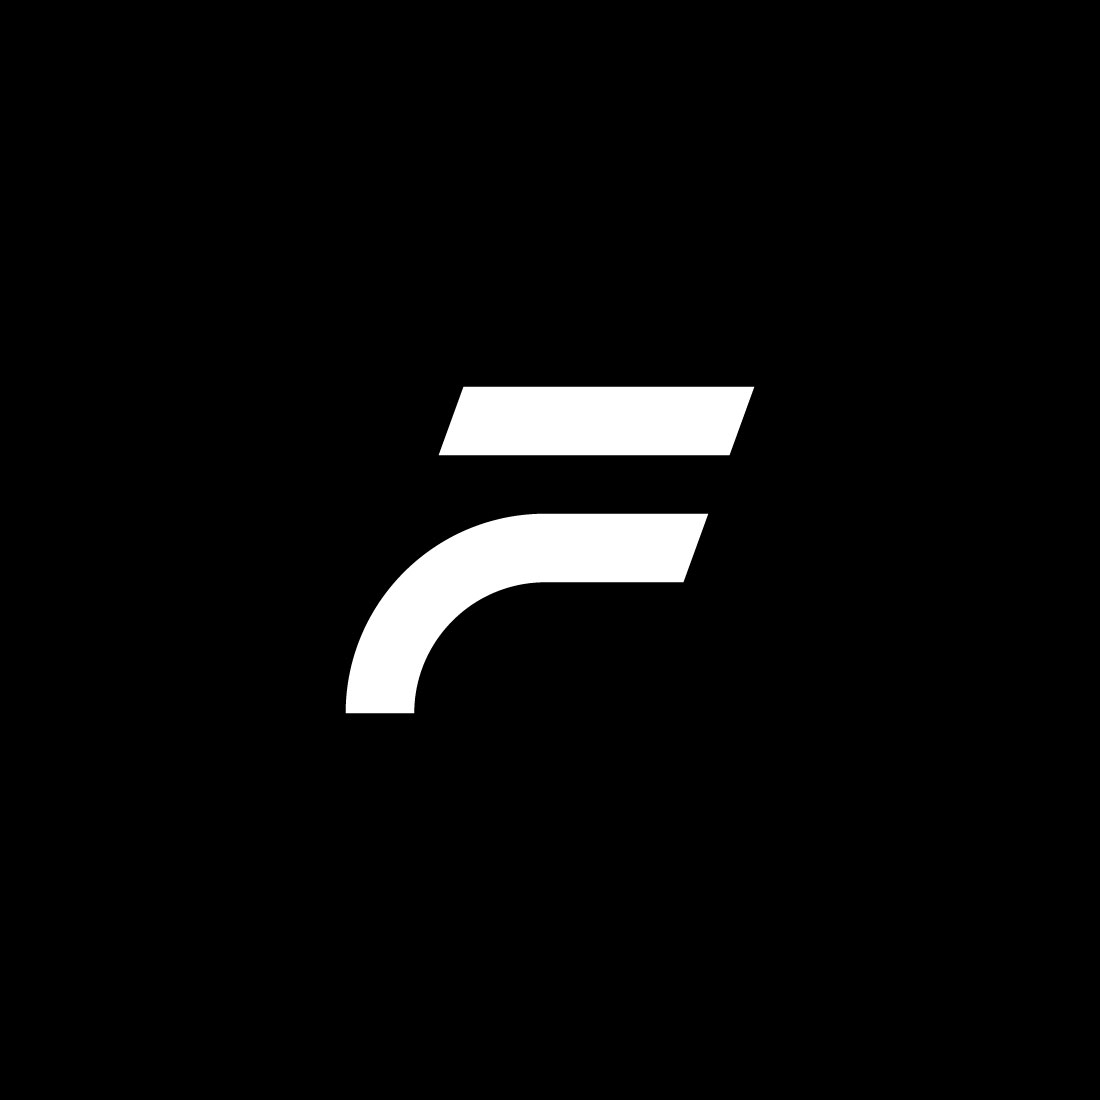 Simple F Letter Logo Design Graphics cover image.